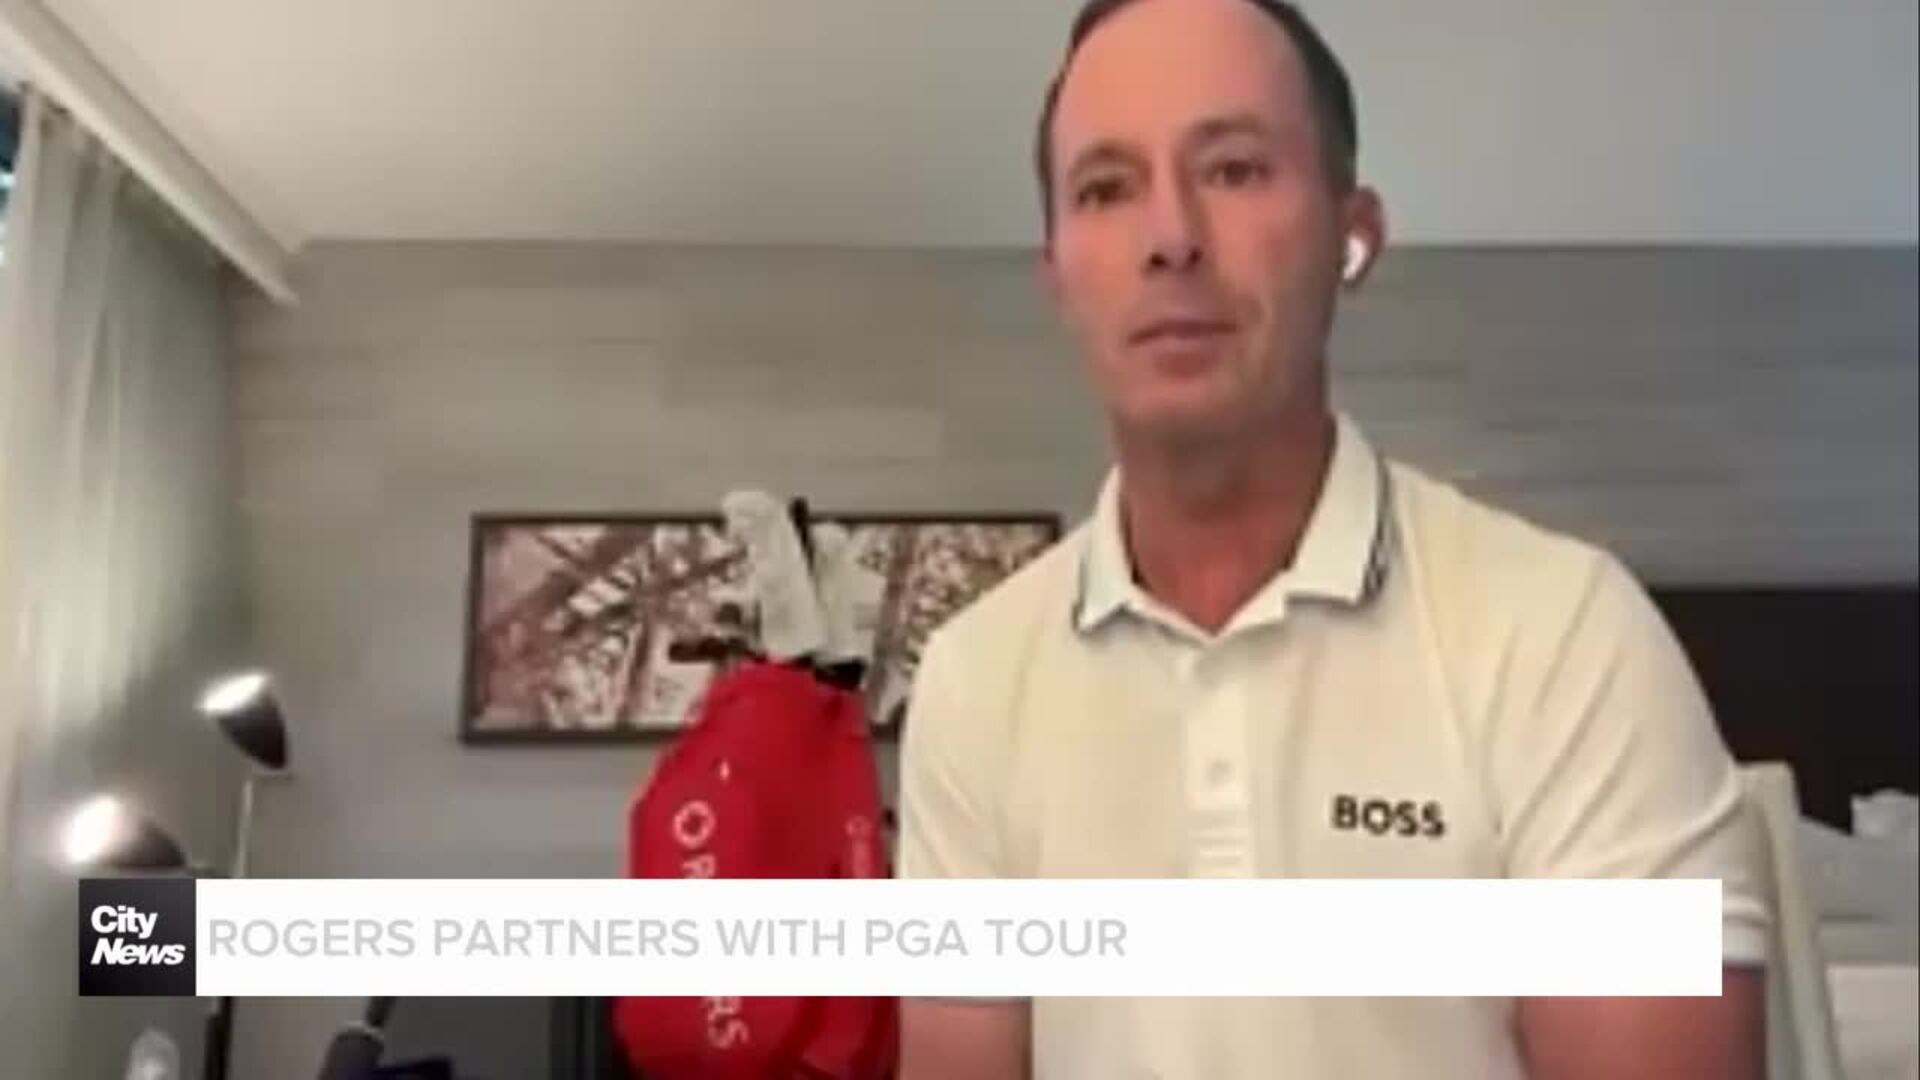 Rogers partners with PGA Tour